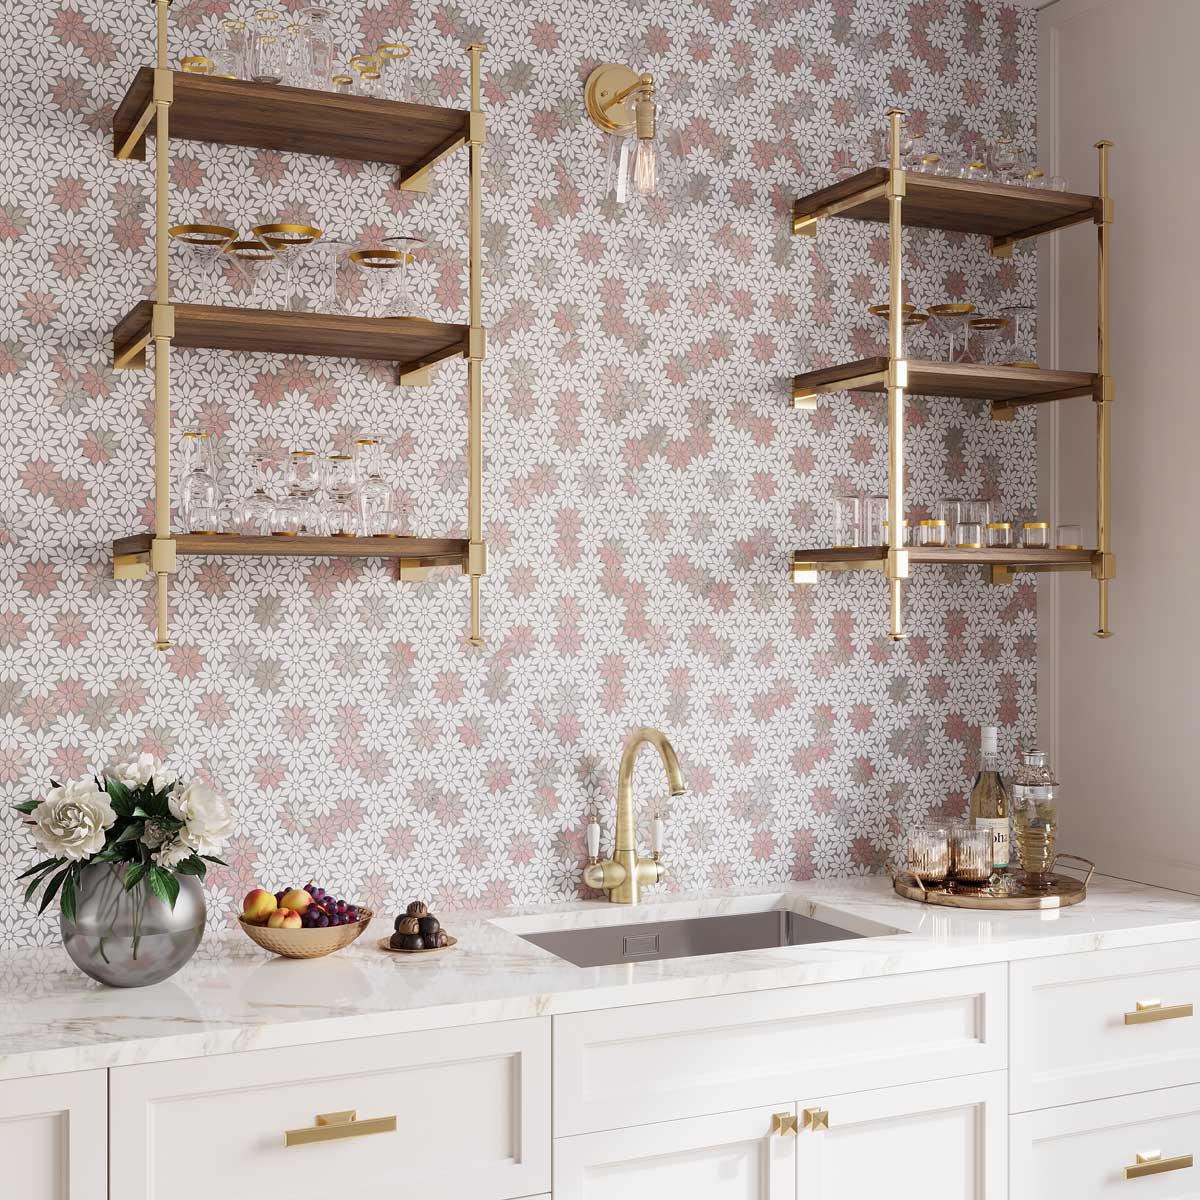 White and pink marble mosaic tile backsplash for a home wet bar with brass open shelves